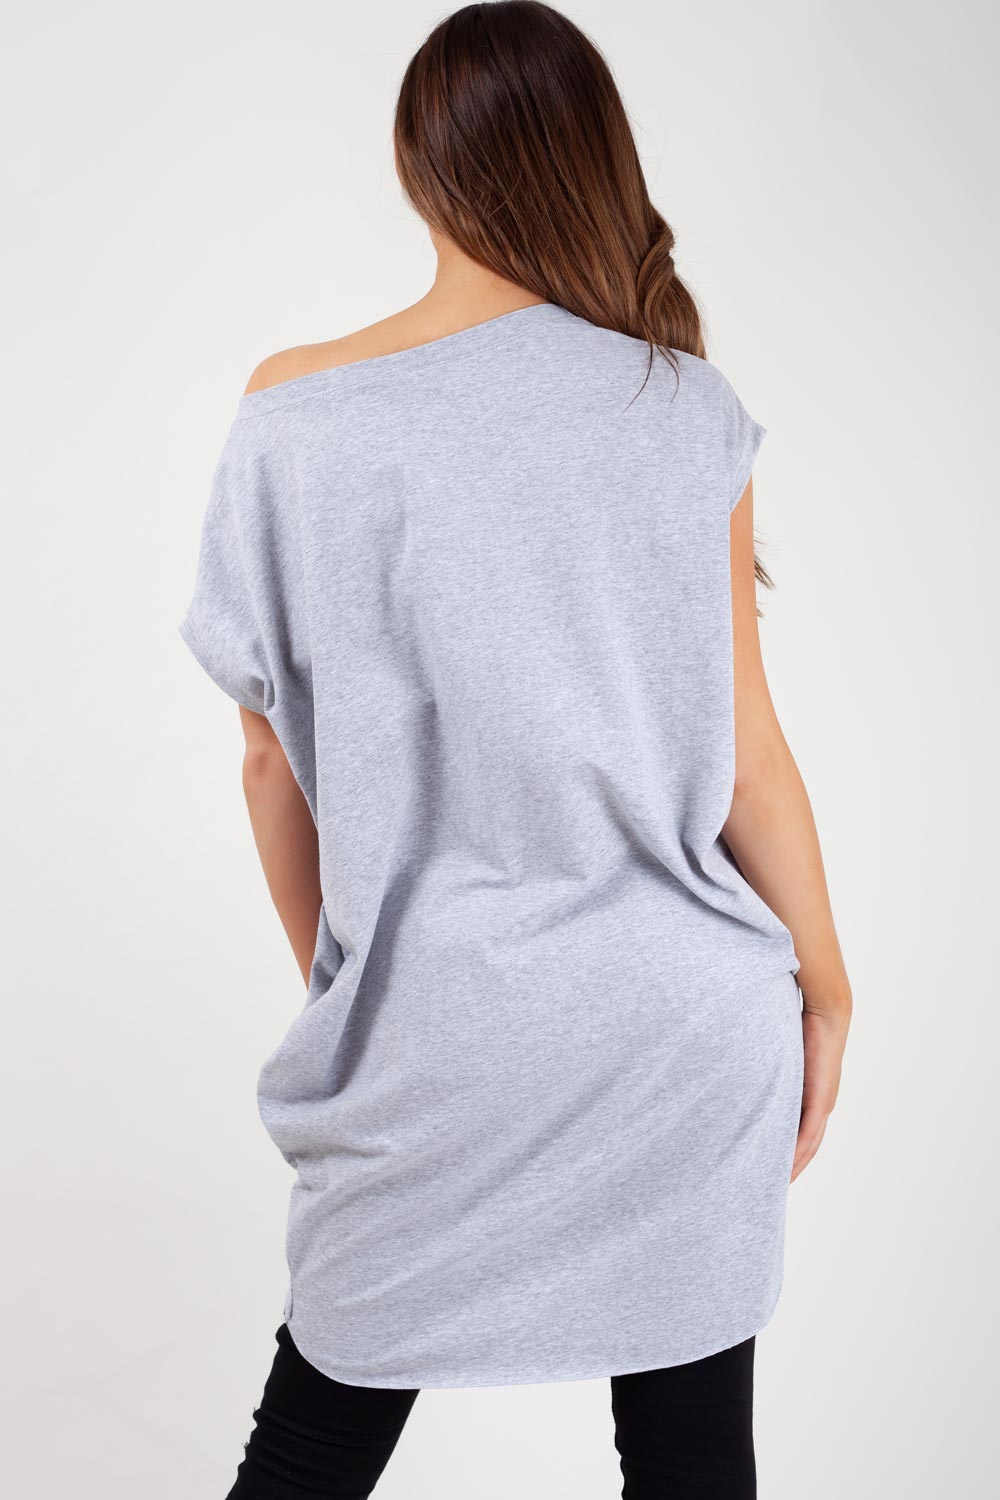 grey oversized womens t shirt made in italy 